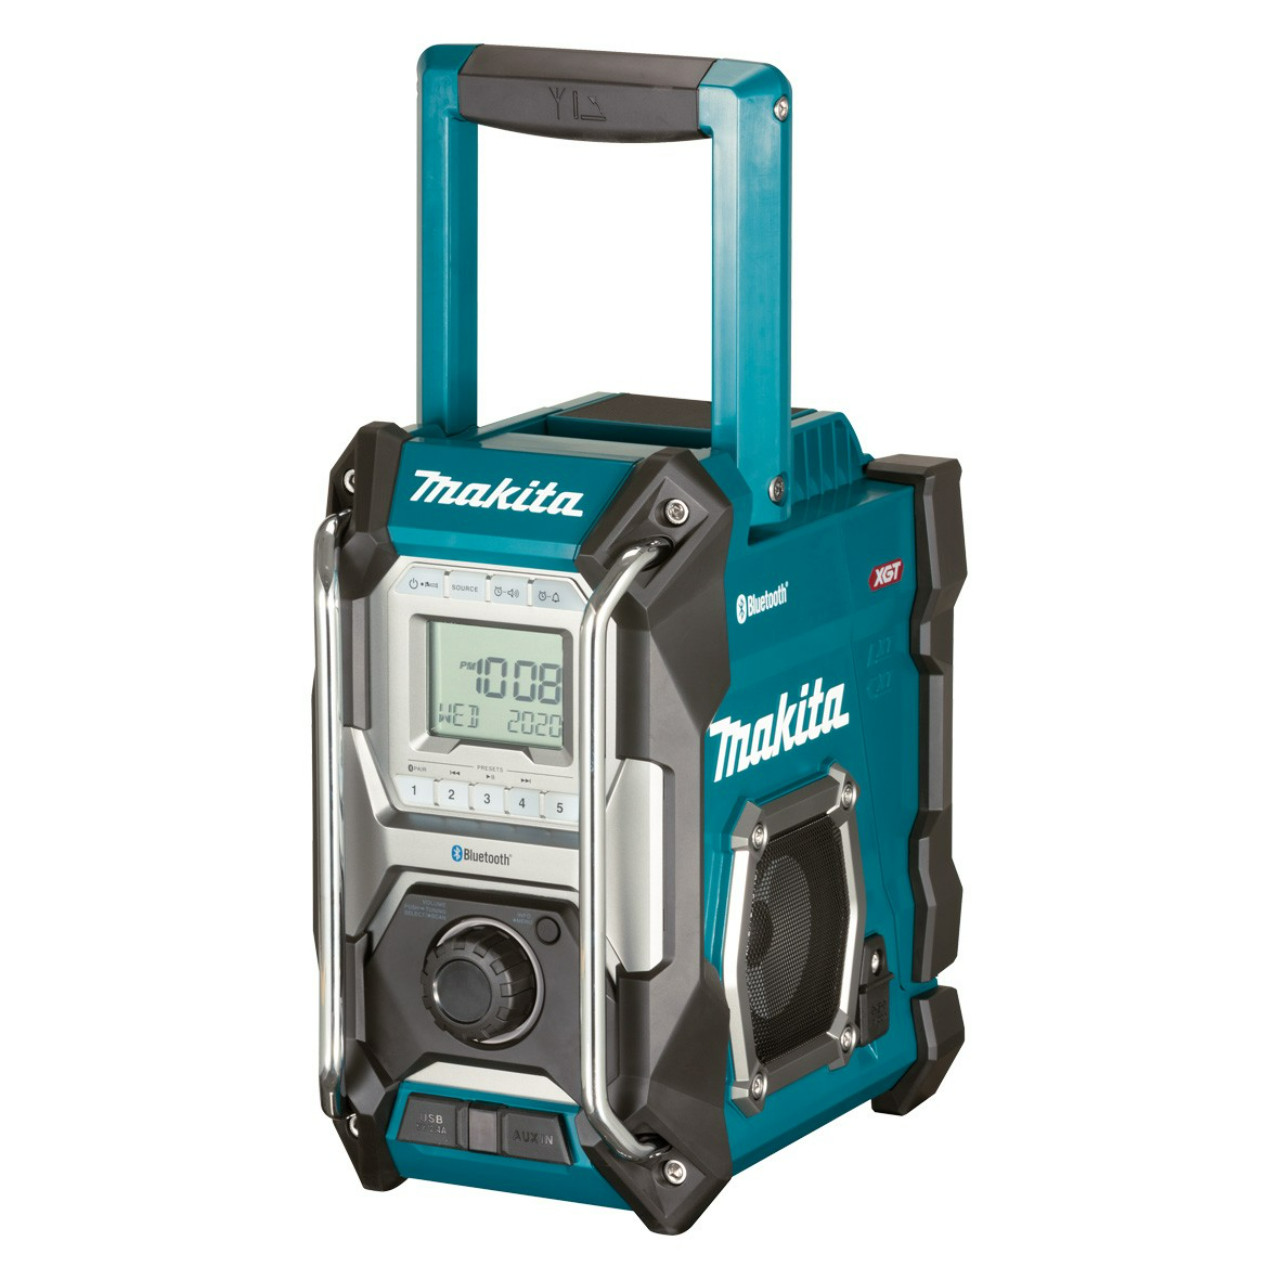 Makita 40V Max Bluetooth Jobsite Radio, also compatible with 18V LXT & 12V Max CXT Batteries - Tool Only